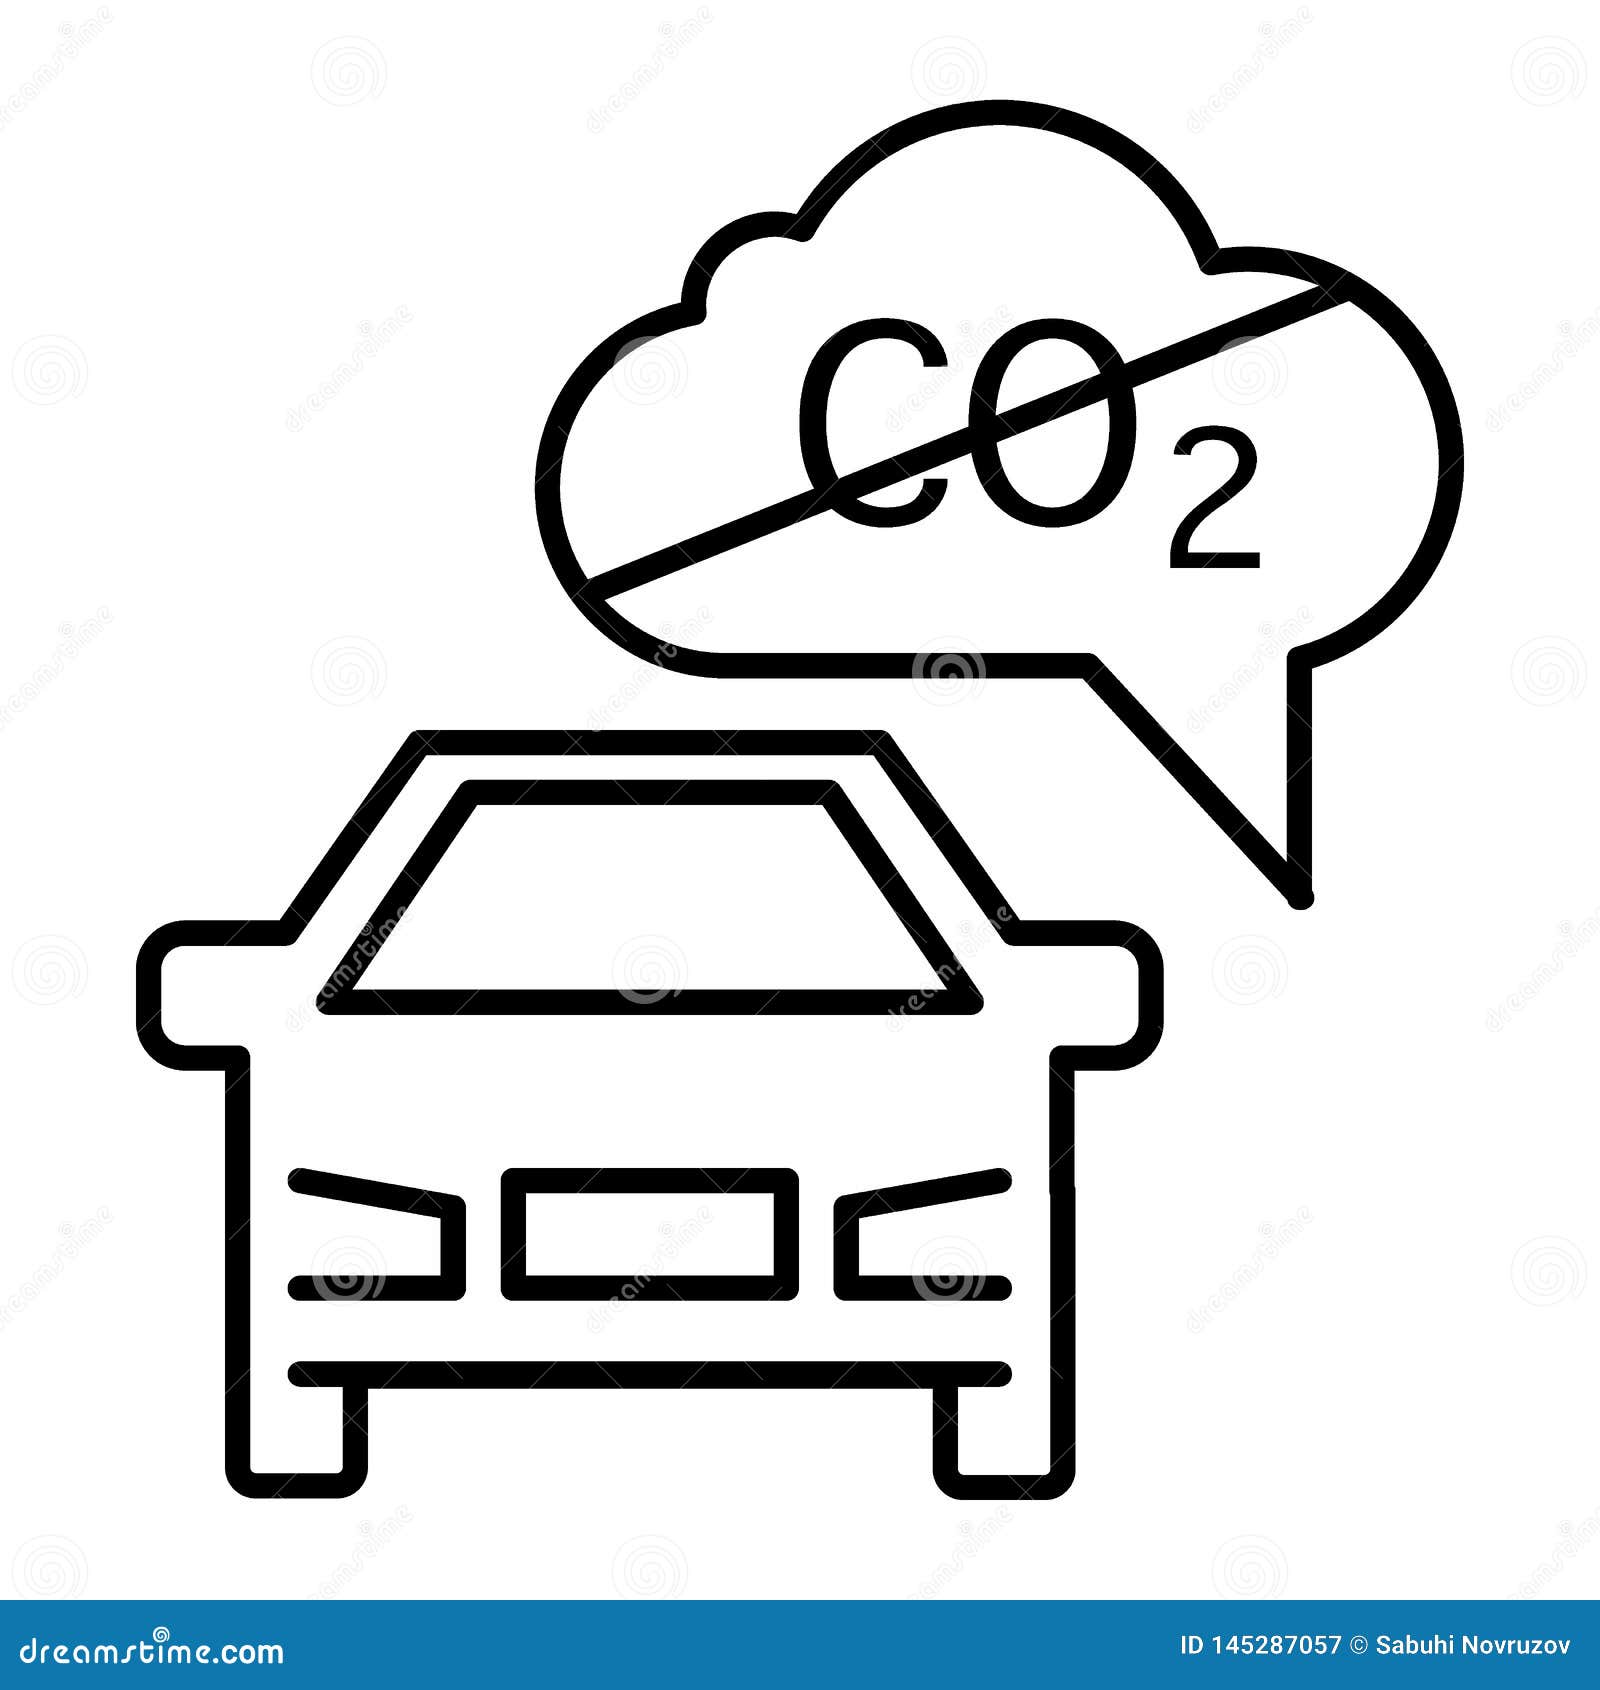 Ecological Car Thin Line Icon. No CO2 Vehicle Illustration Isolated on ...